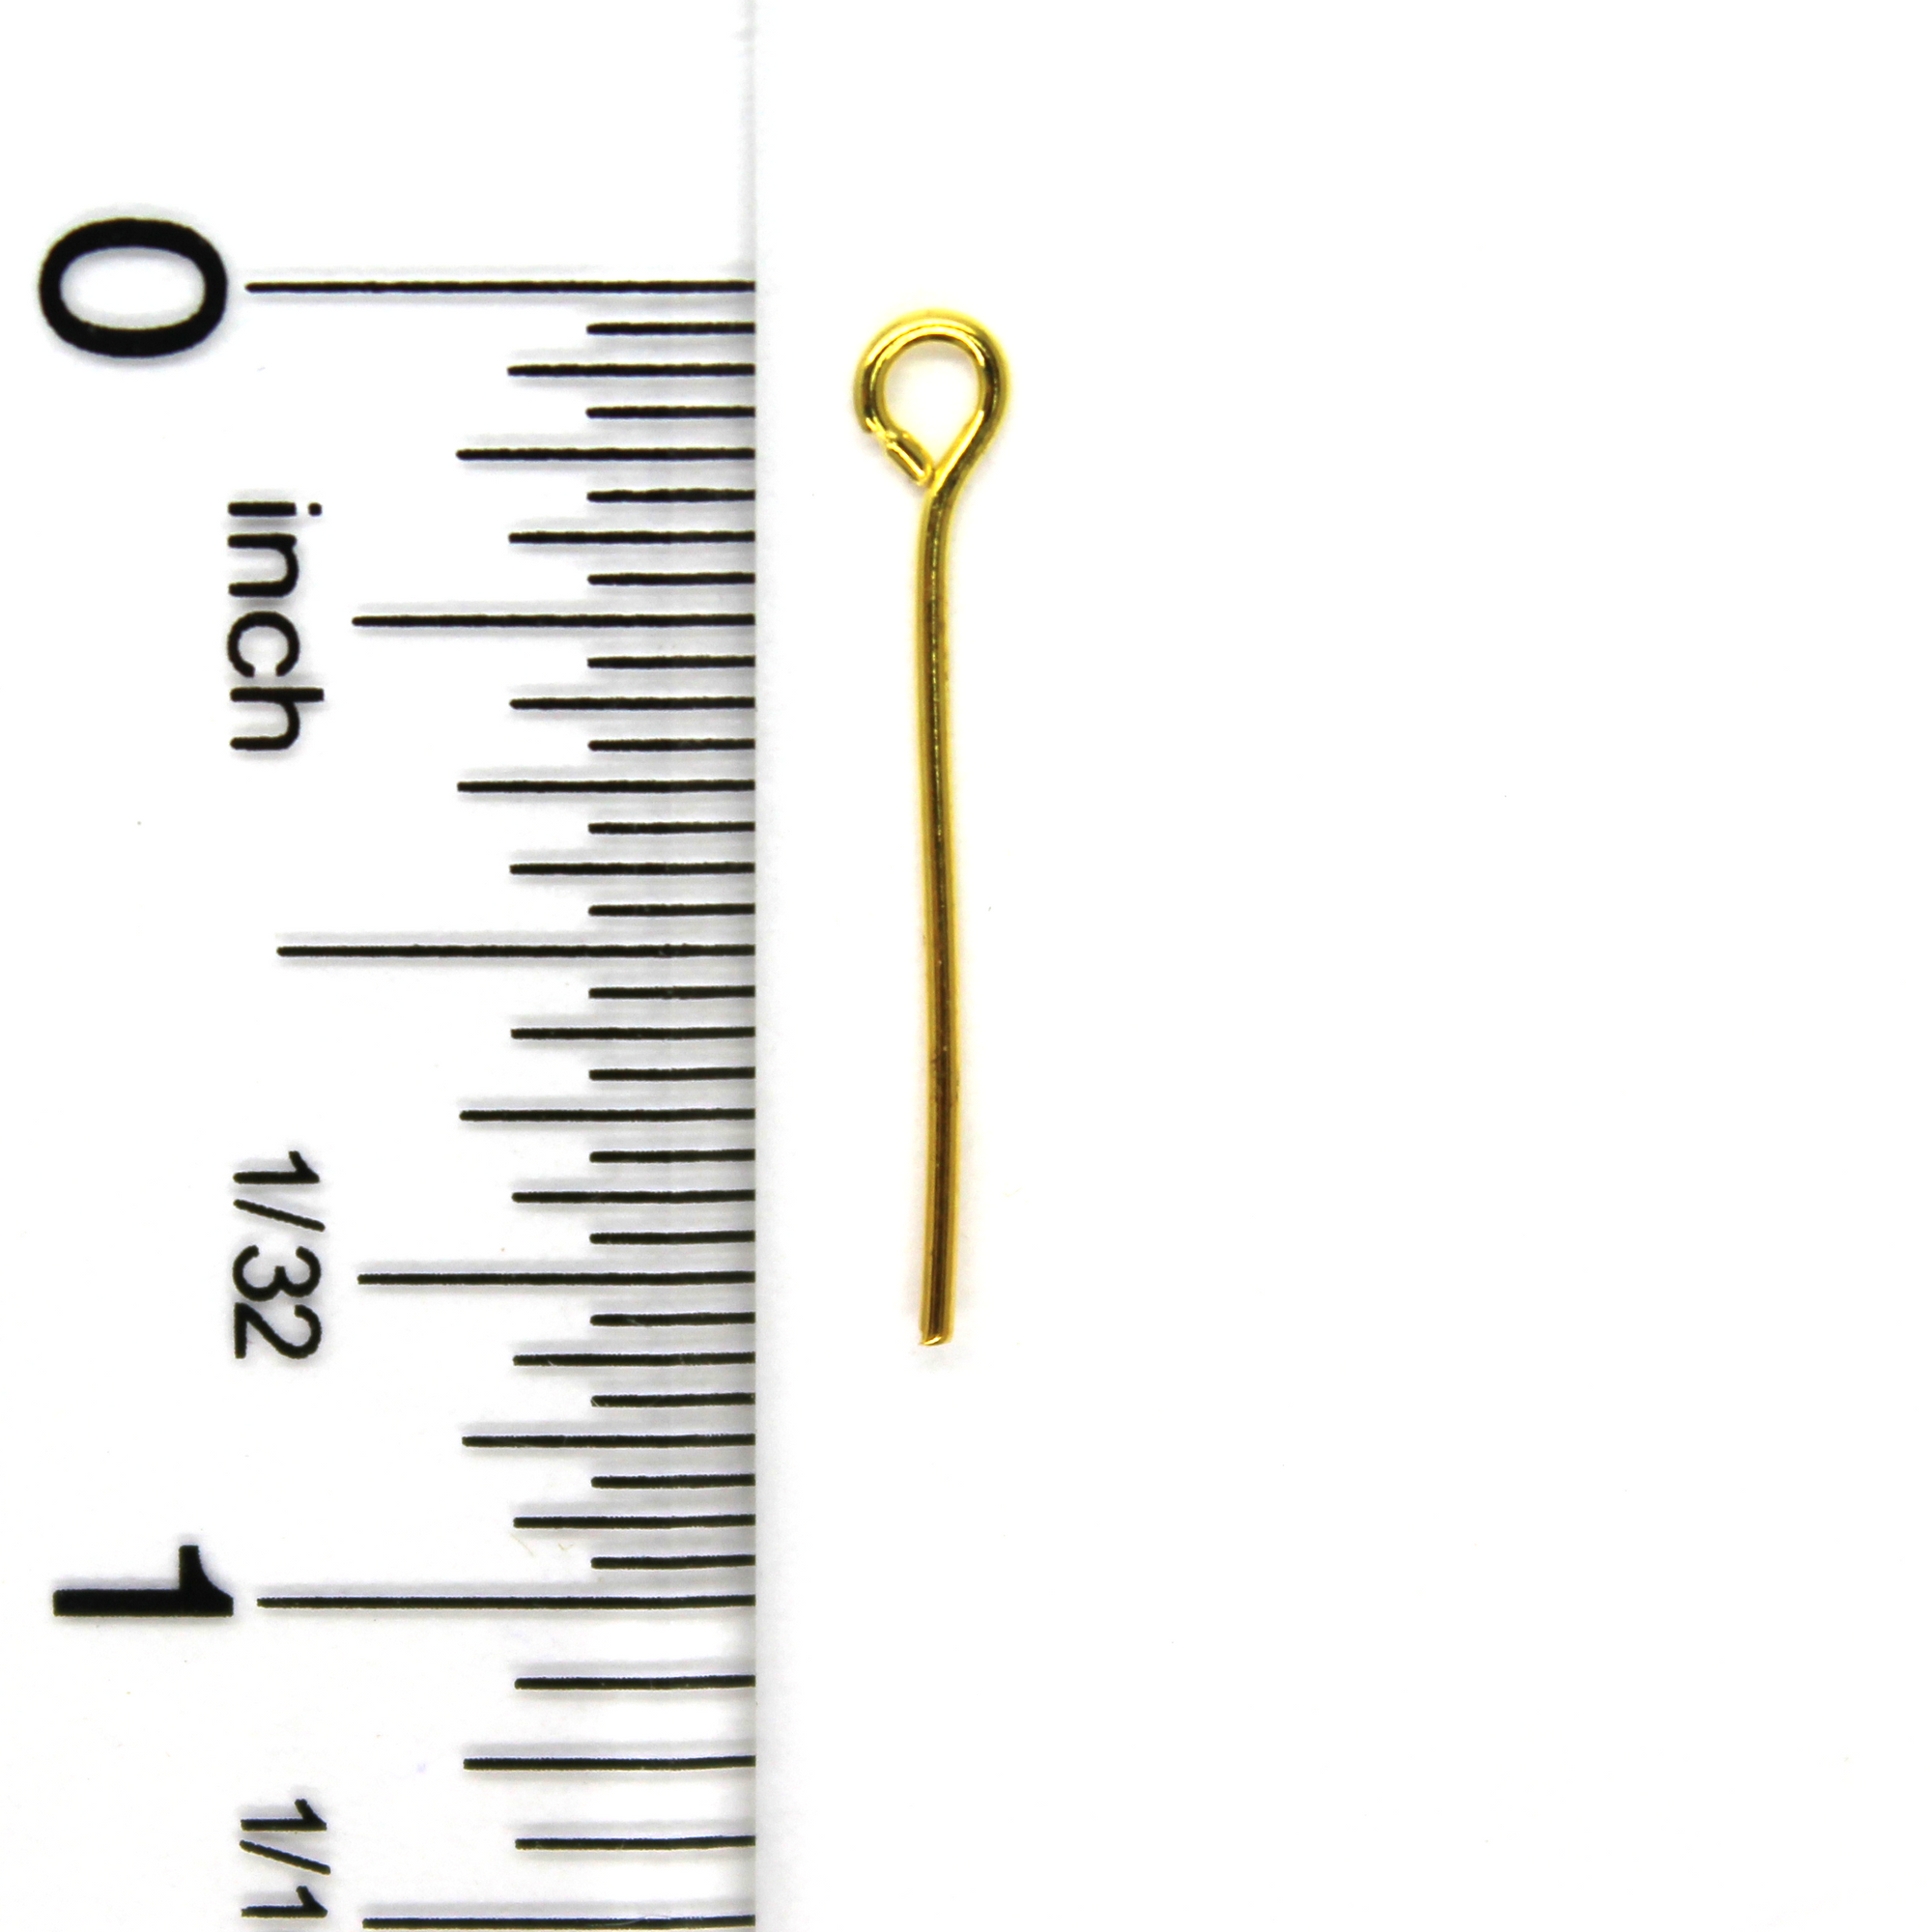 Eye Pins, Gold, Alloy, 0.79 inches, 21 Gauge, Sold Per pkg of 120